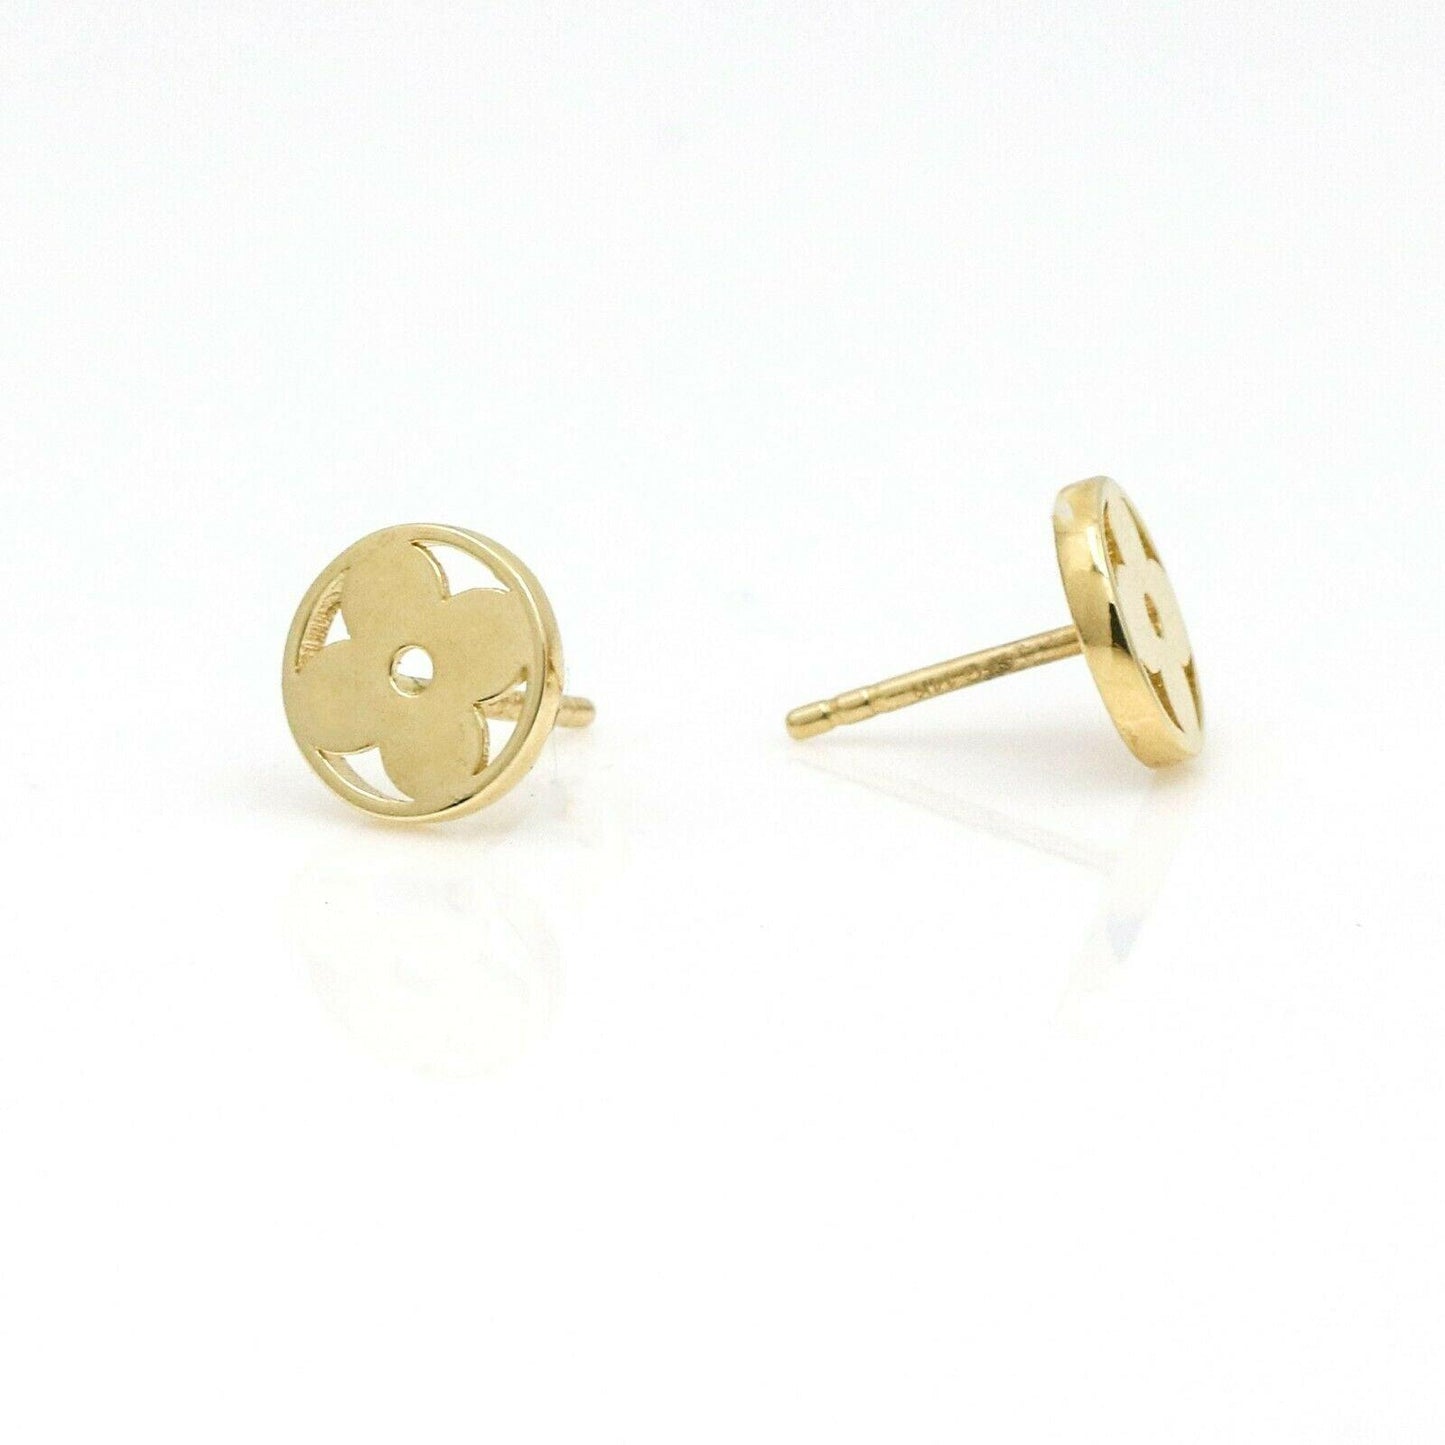 Women's Four-Leaf Clover Round Stud Earrings in 14k Yellow Gold - 31 Jewels Inc.